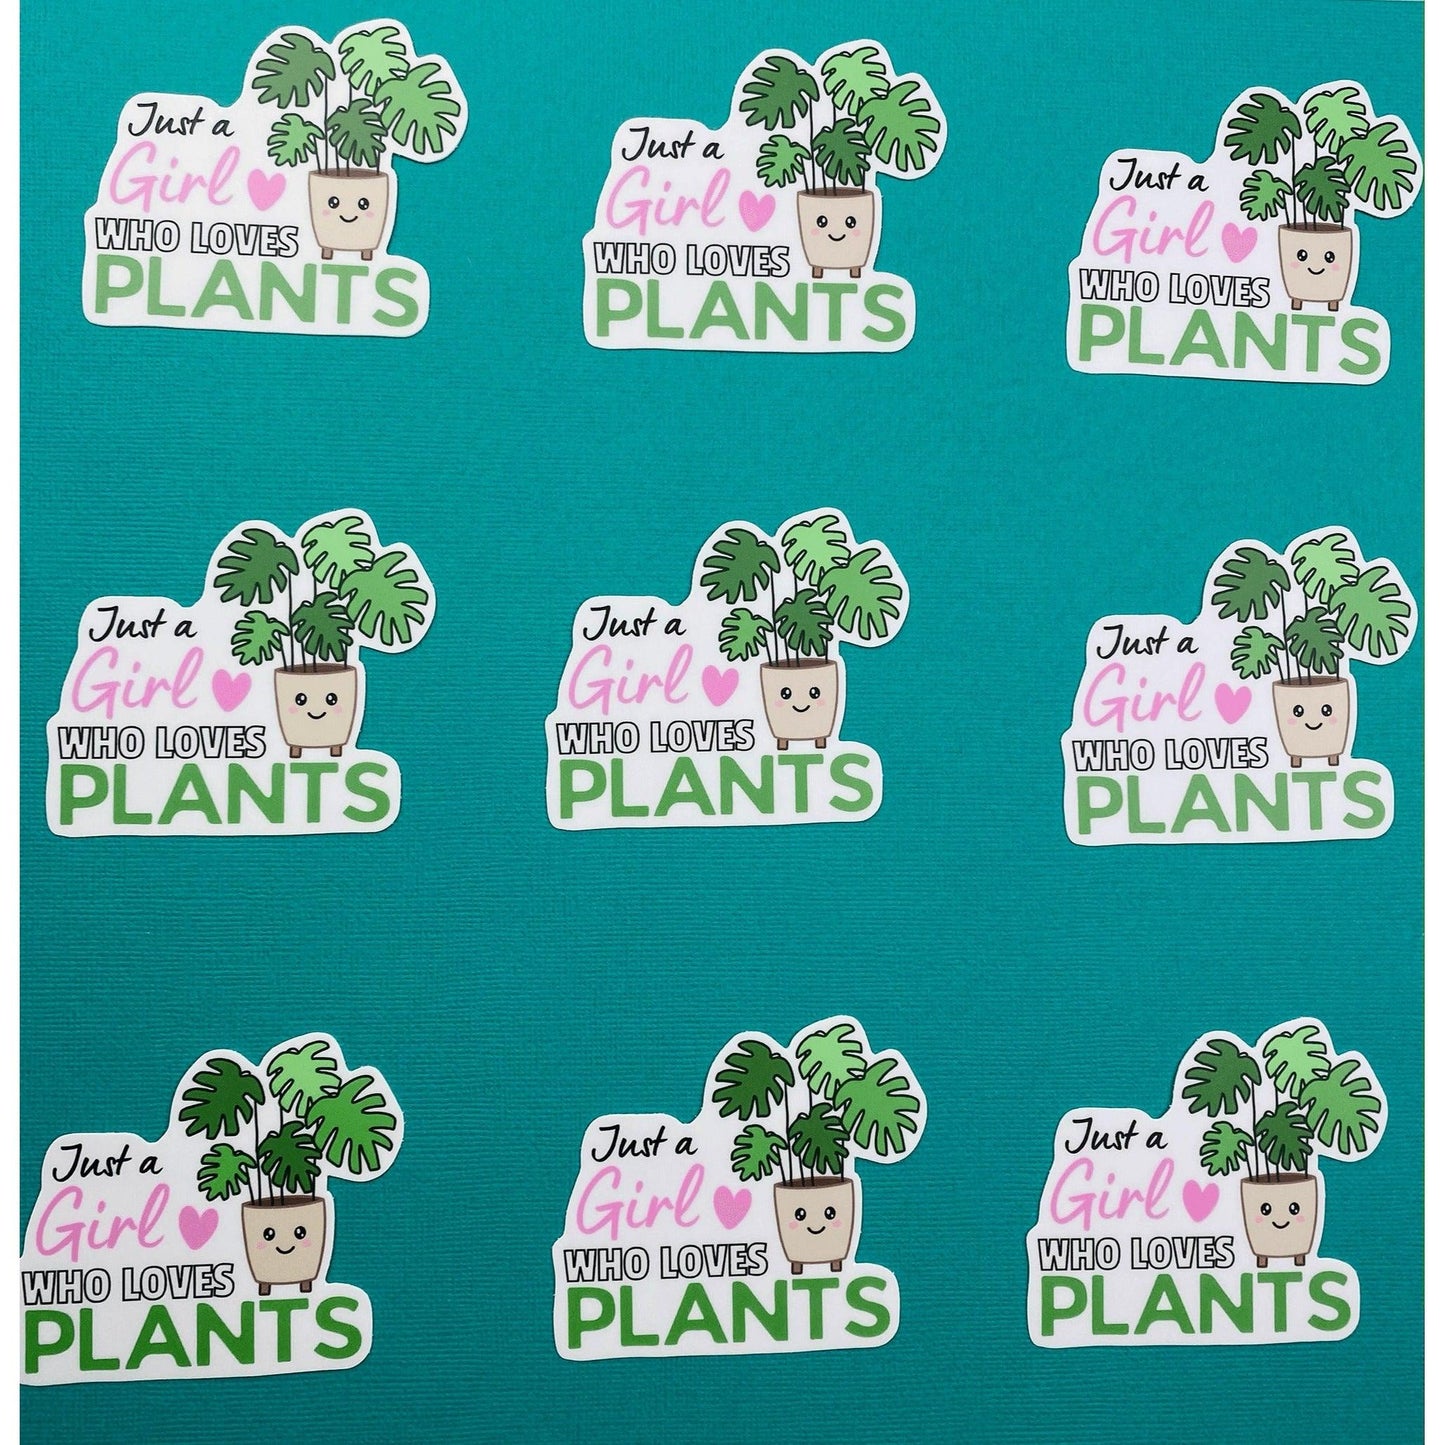 Kawaii Plant Love Sticker, Girl Who Loves Plants Sticker,Kawaii   Monstera Plant Sticker for Plant Lovers, Cute Stickers for Water Bottle - Ottos Grotto :: Stickers For Your Stuff